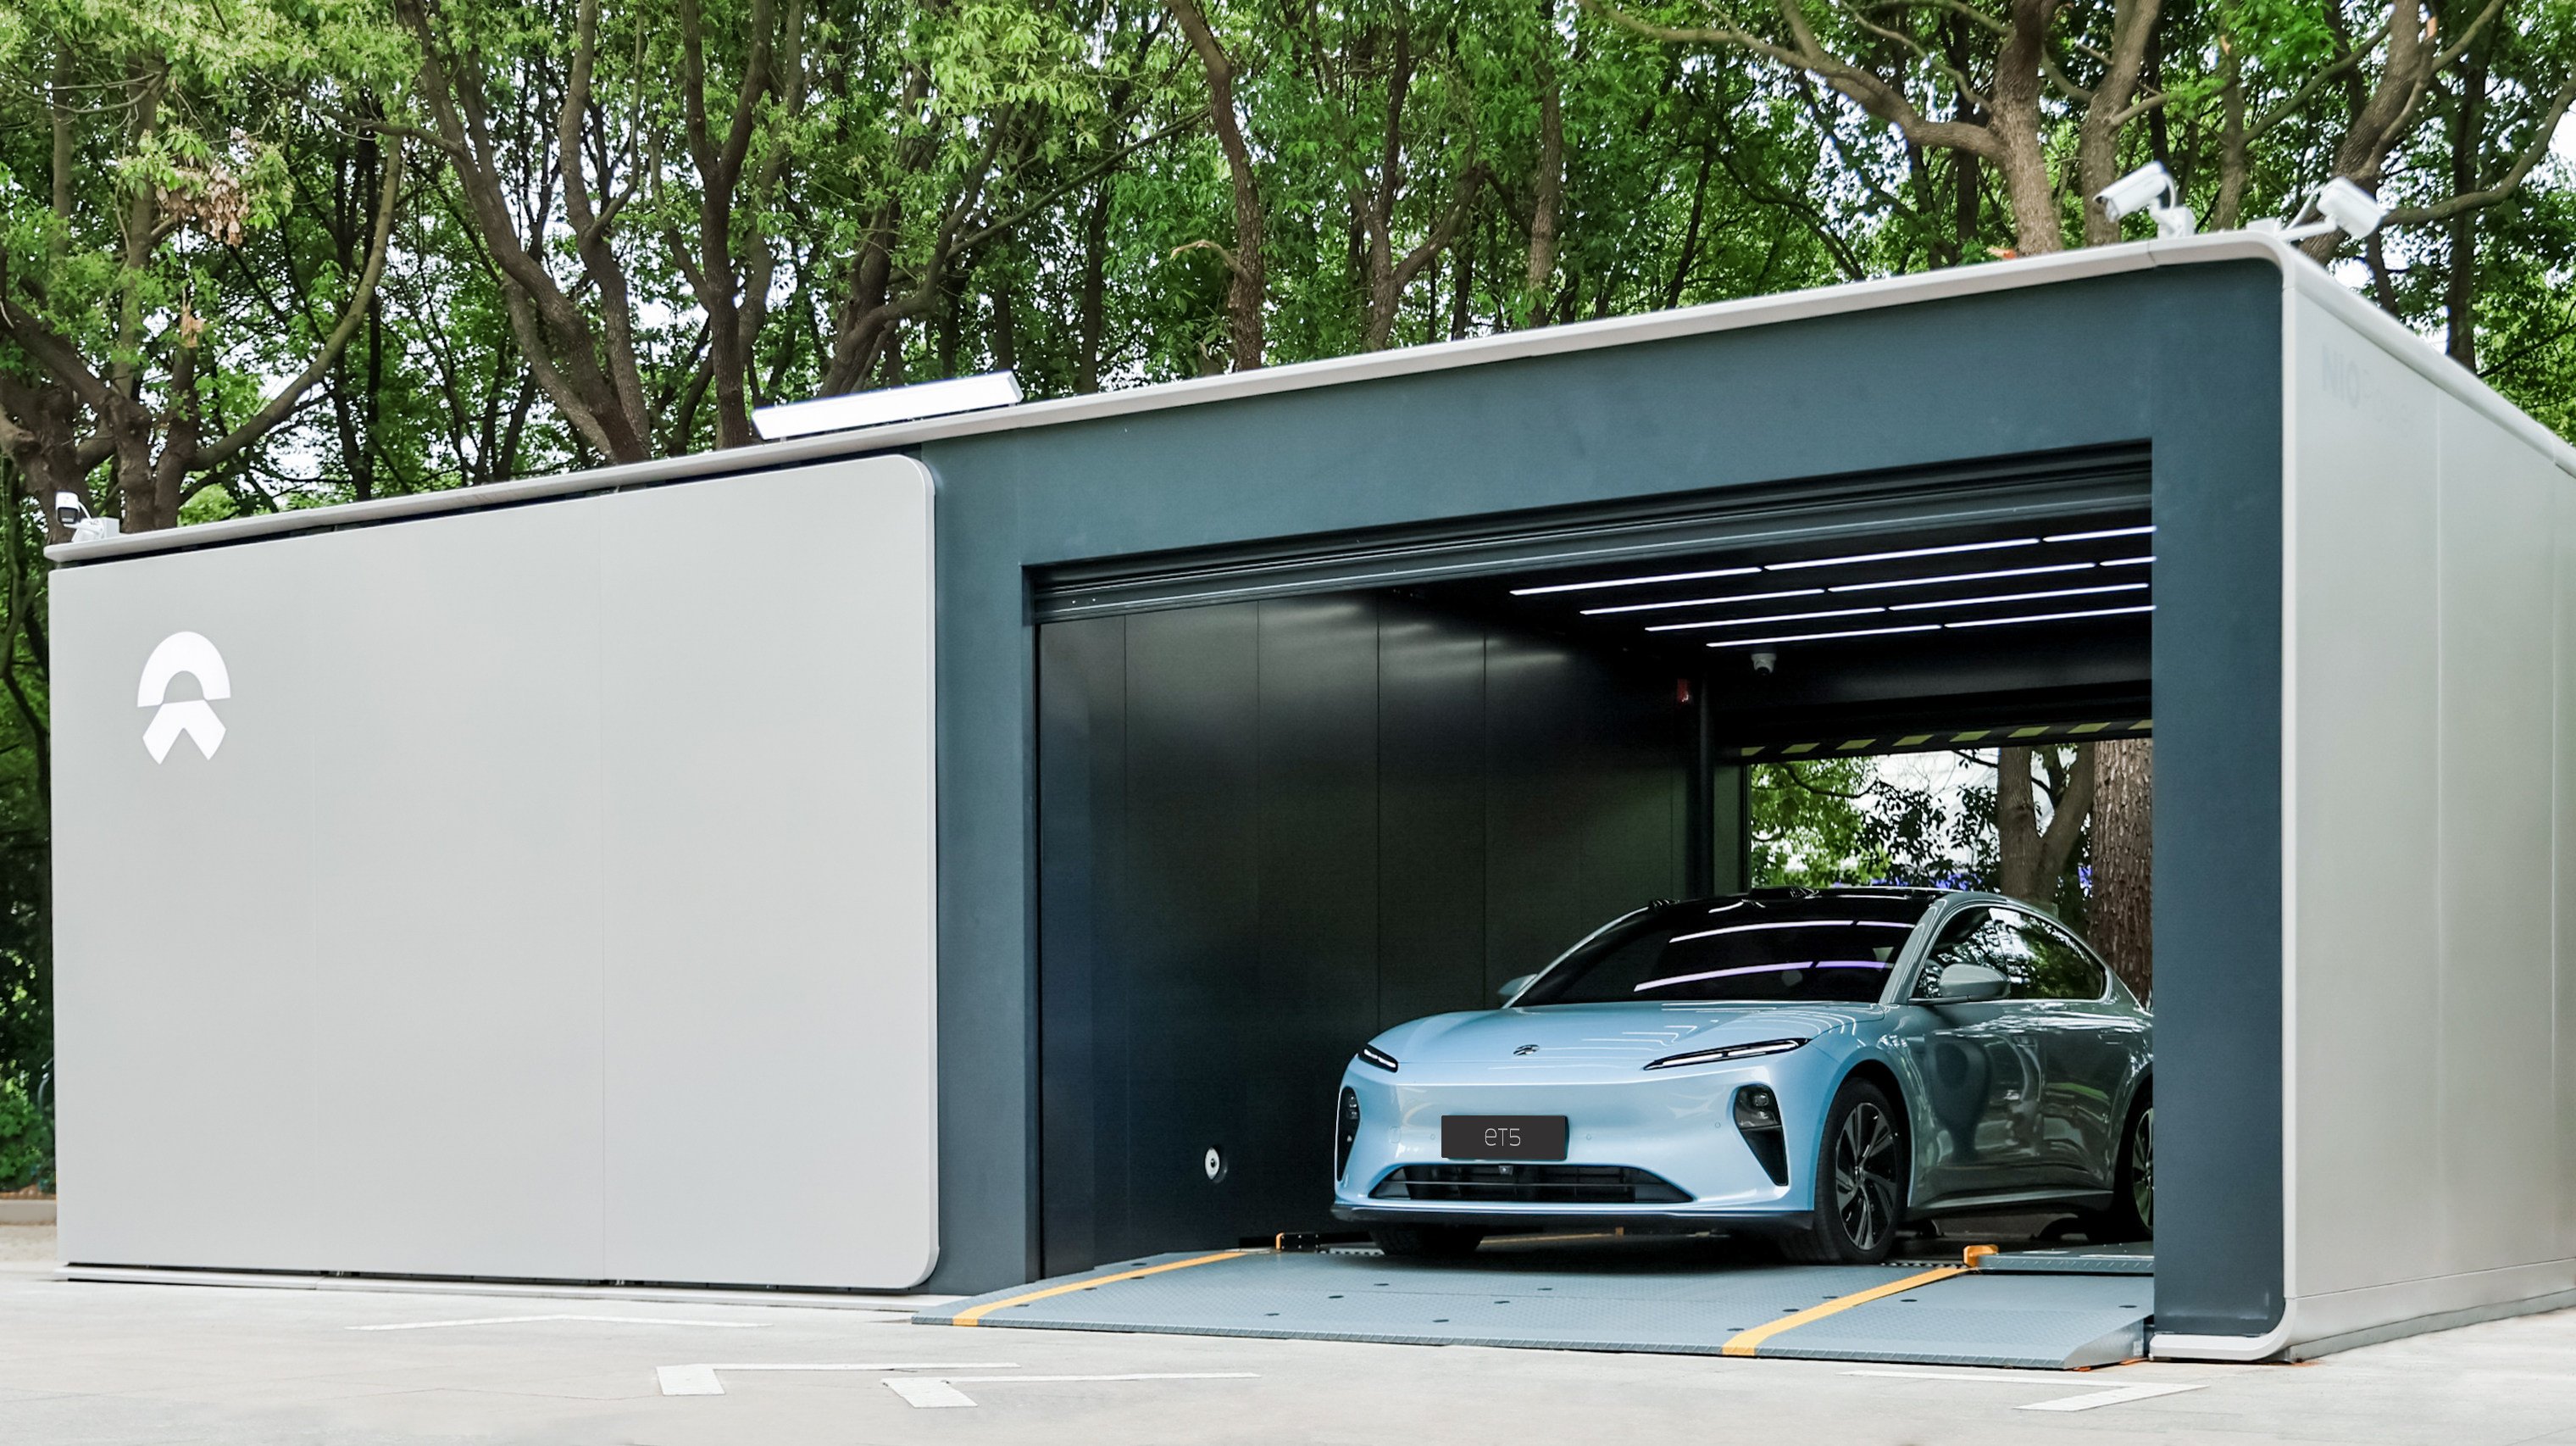 A battery-swapping station from Chinese electric vehicle maker Nio, the market leader in building such facilities. Photo: Handout